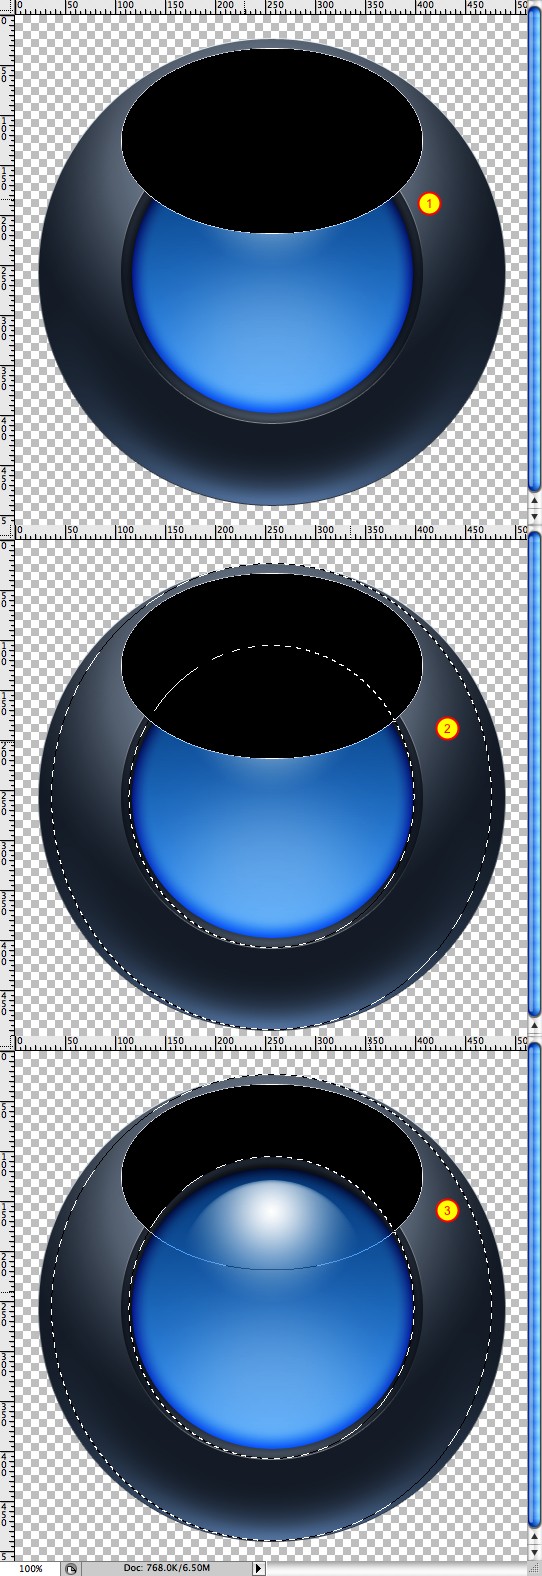 Quicktime Icon in Photoshop